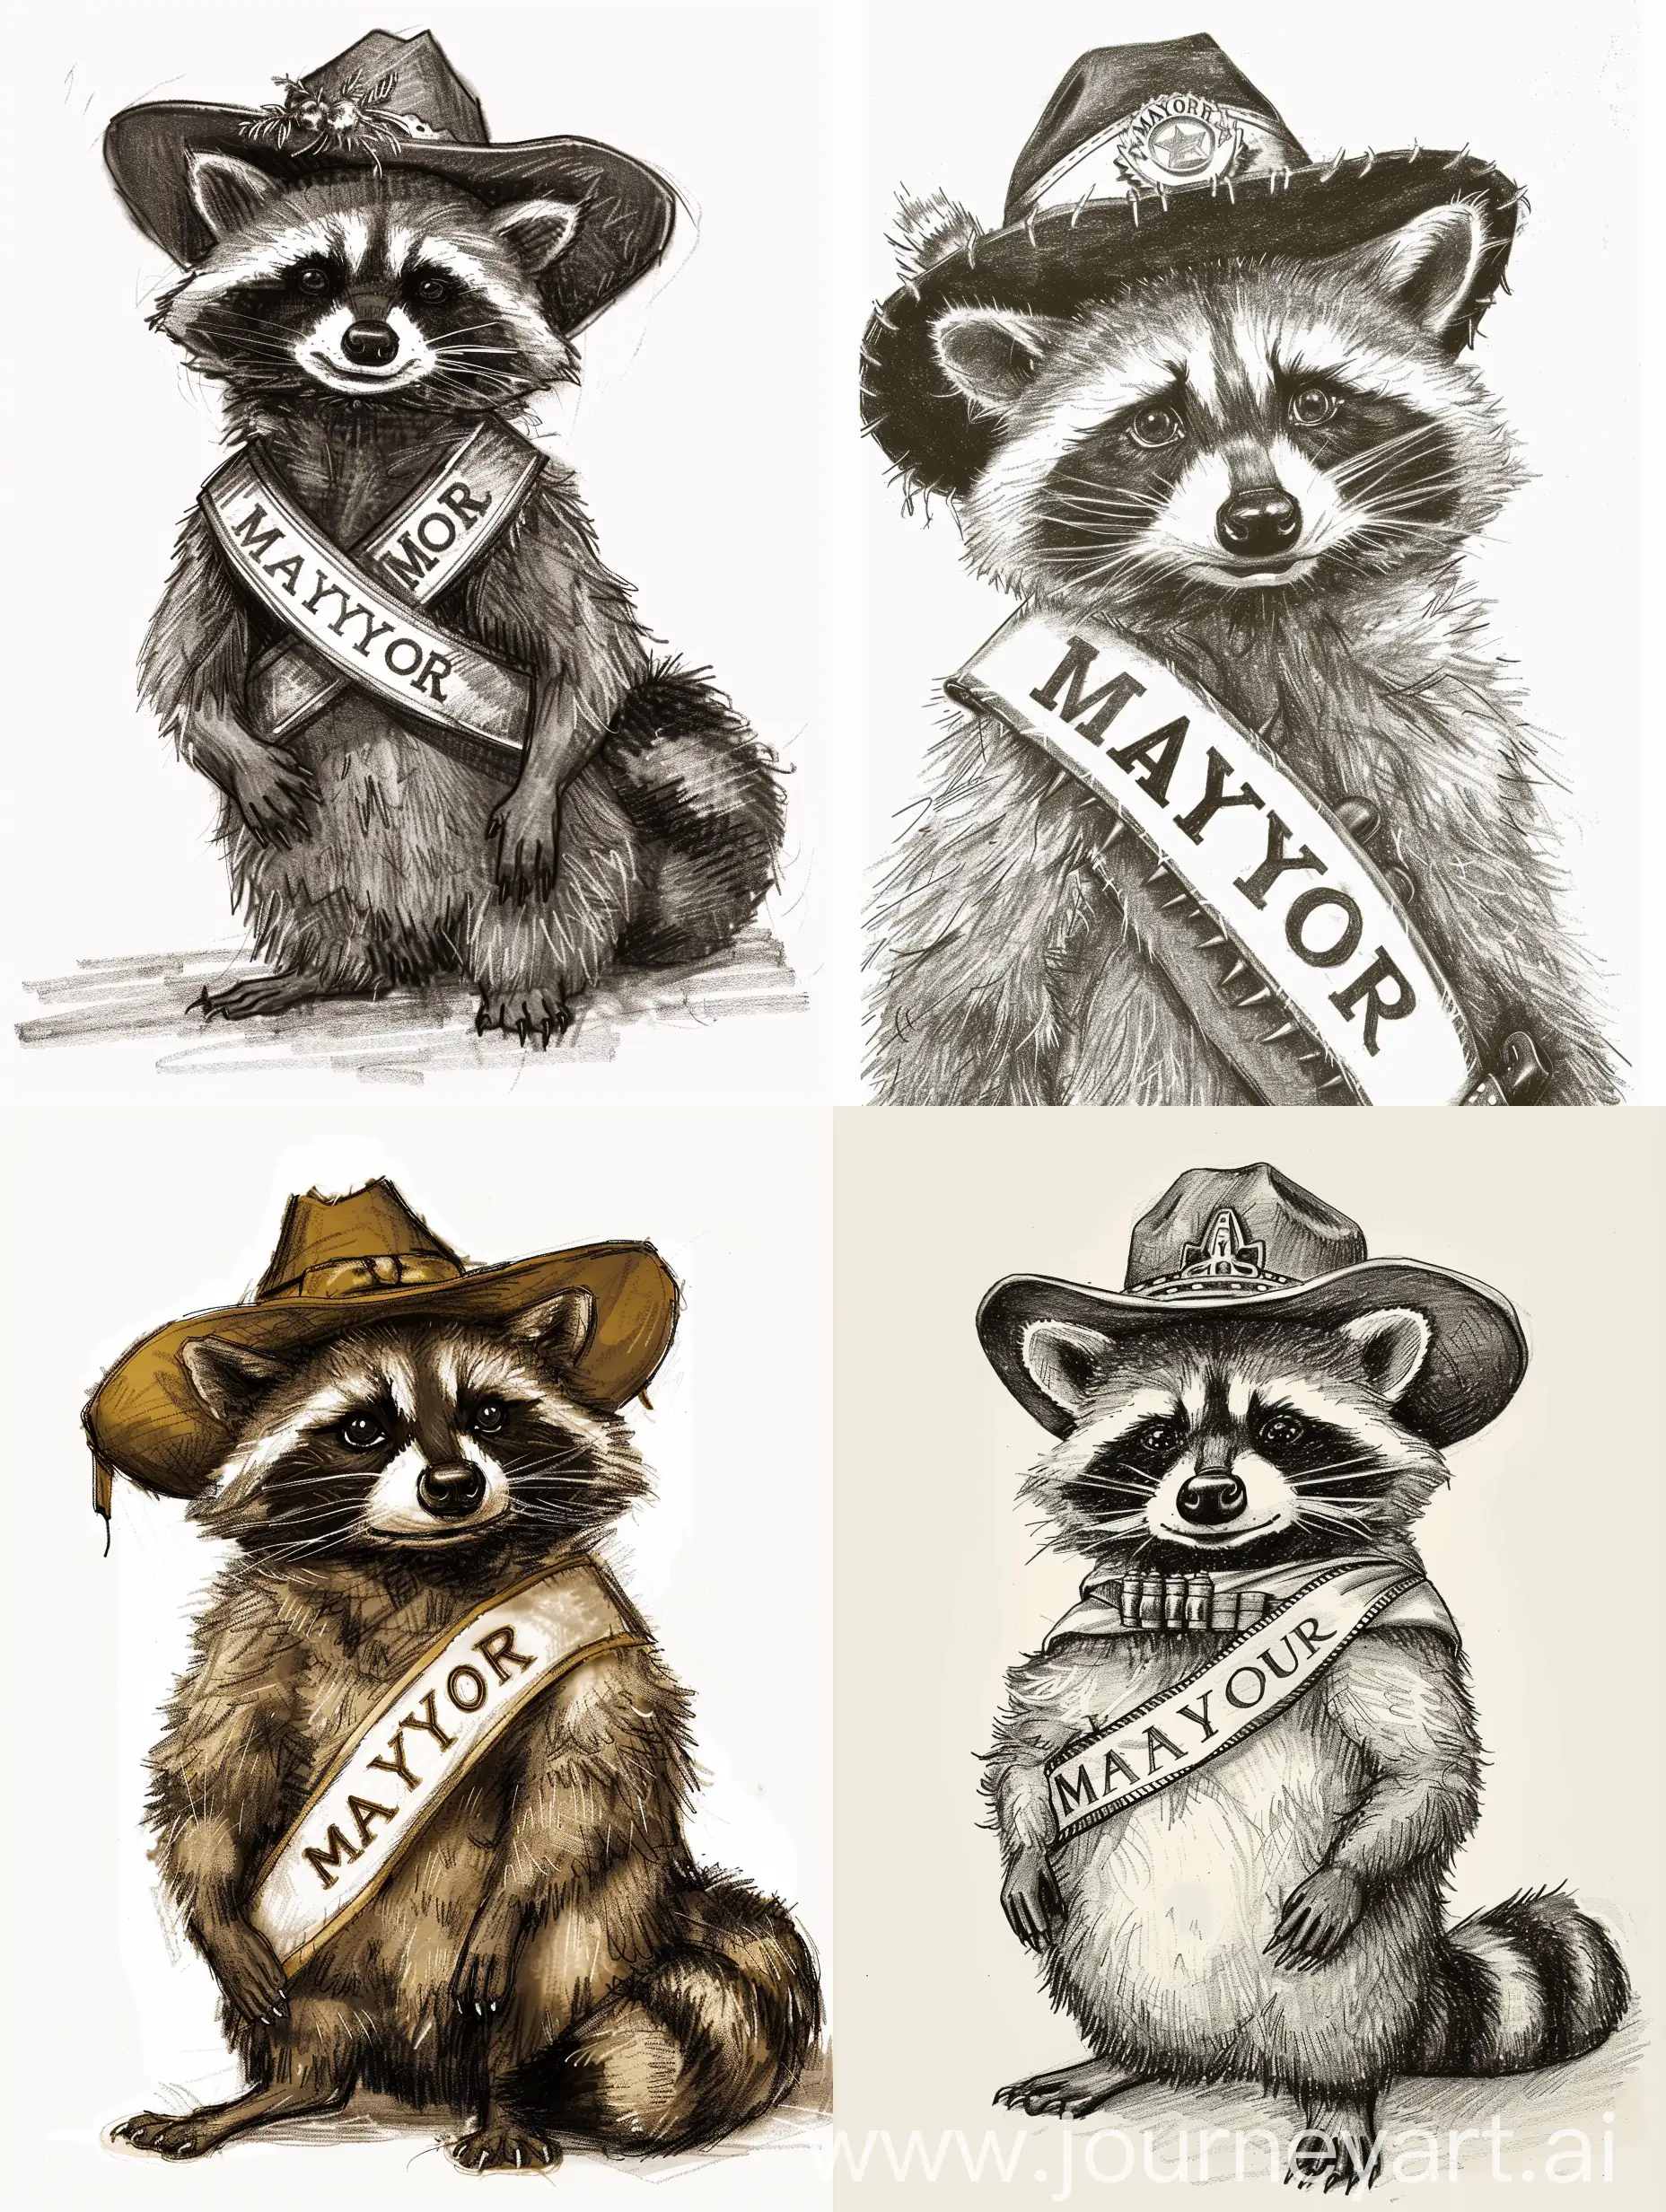 A dignified raccoon character wearing a western-style hat and a sash that says "MAYOR", with an innocent expression, posing for a promo poster. The raccoon should be cartoonish, anthropomorphic, and the drawing should have a amateur style. It should be an isolated hand-drawn sketch on a stark white background.